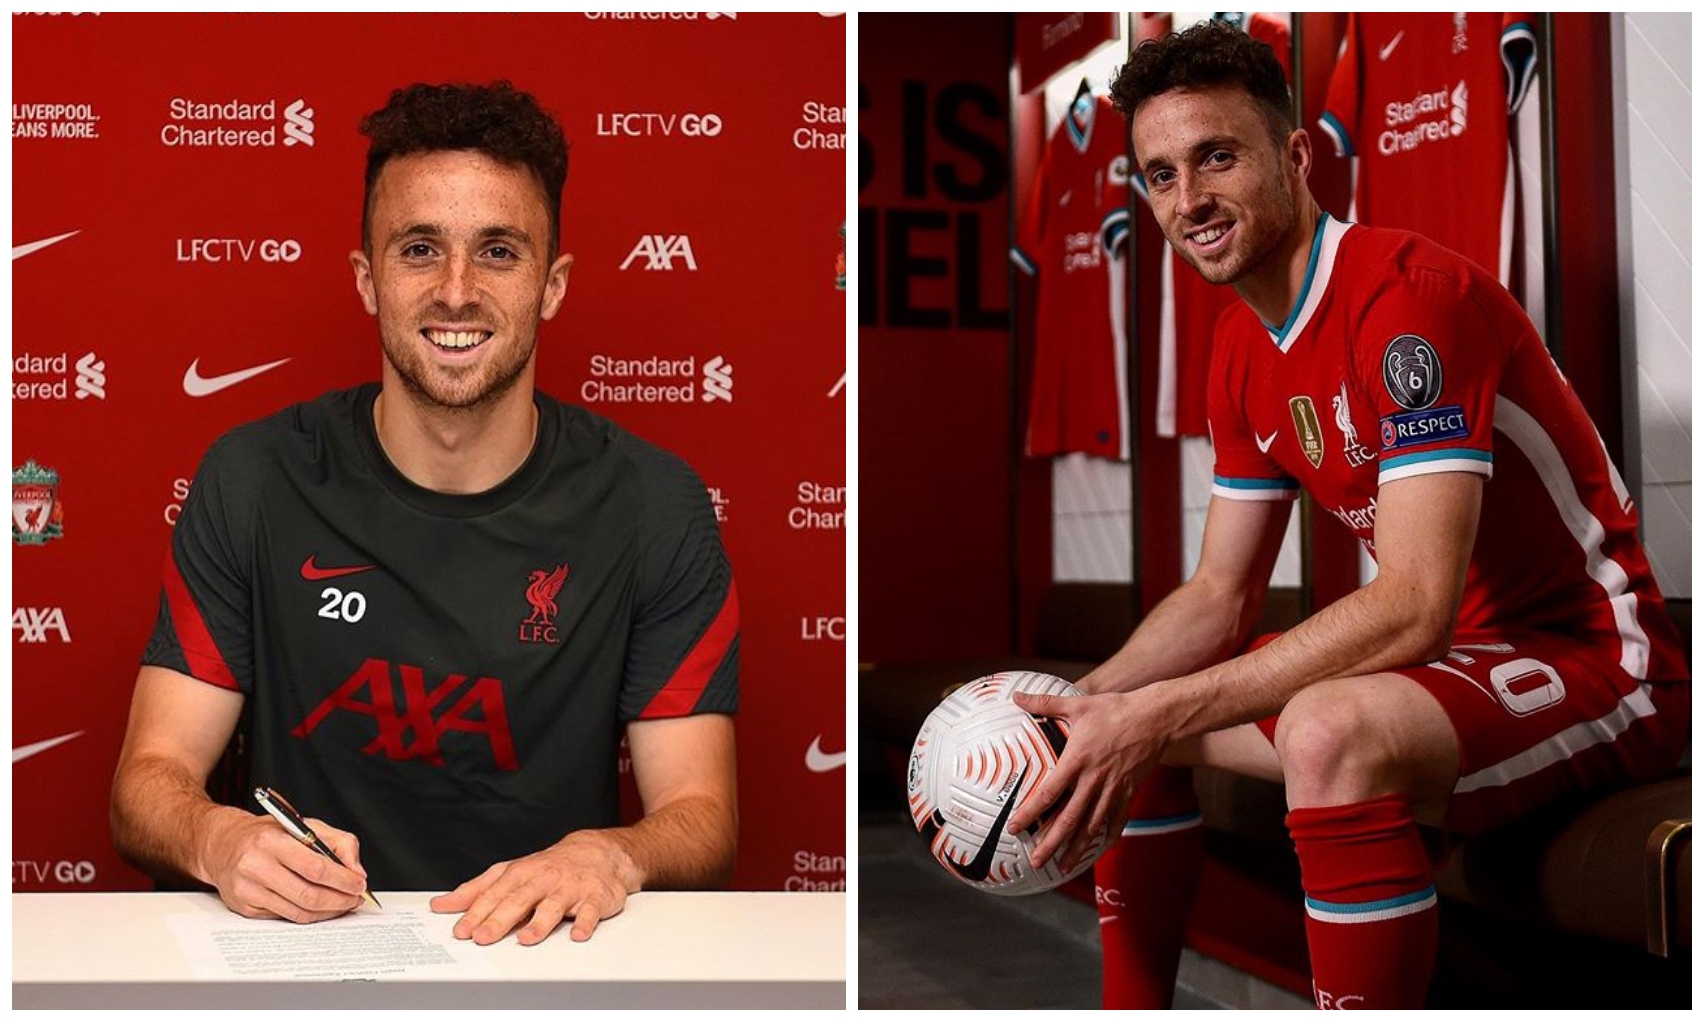 OFFICIAL: Liverpool sign Portuguese forward Diogo Jota from Wolves